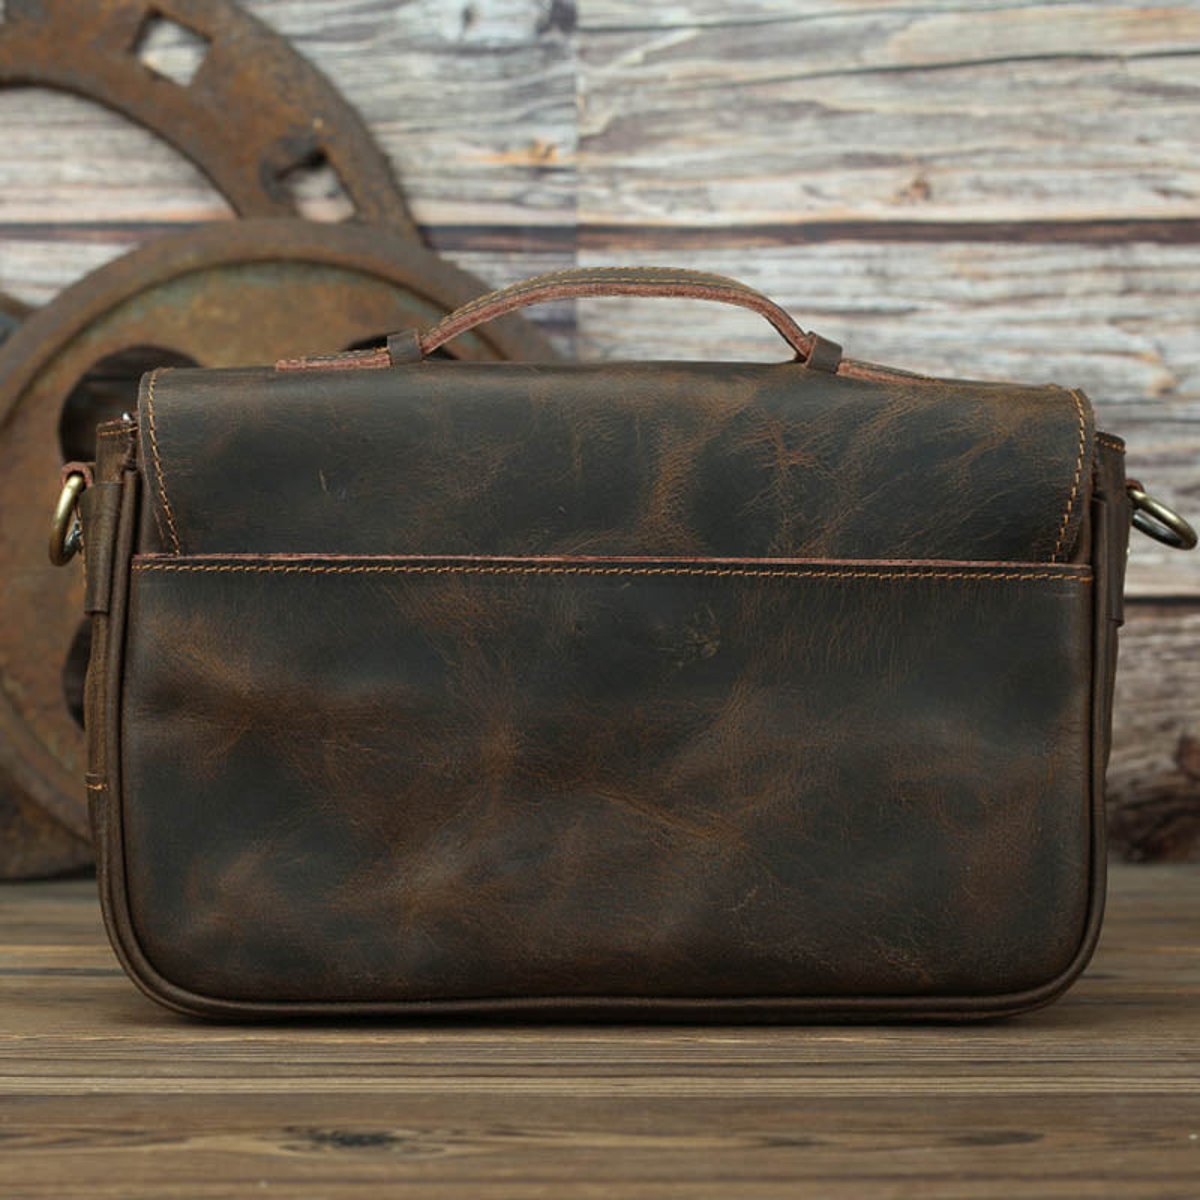 Steel Horse Leather The Faust Leather Crossbody Vintage Camera Messenger Bag - Brown